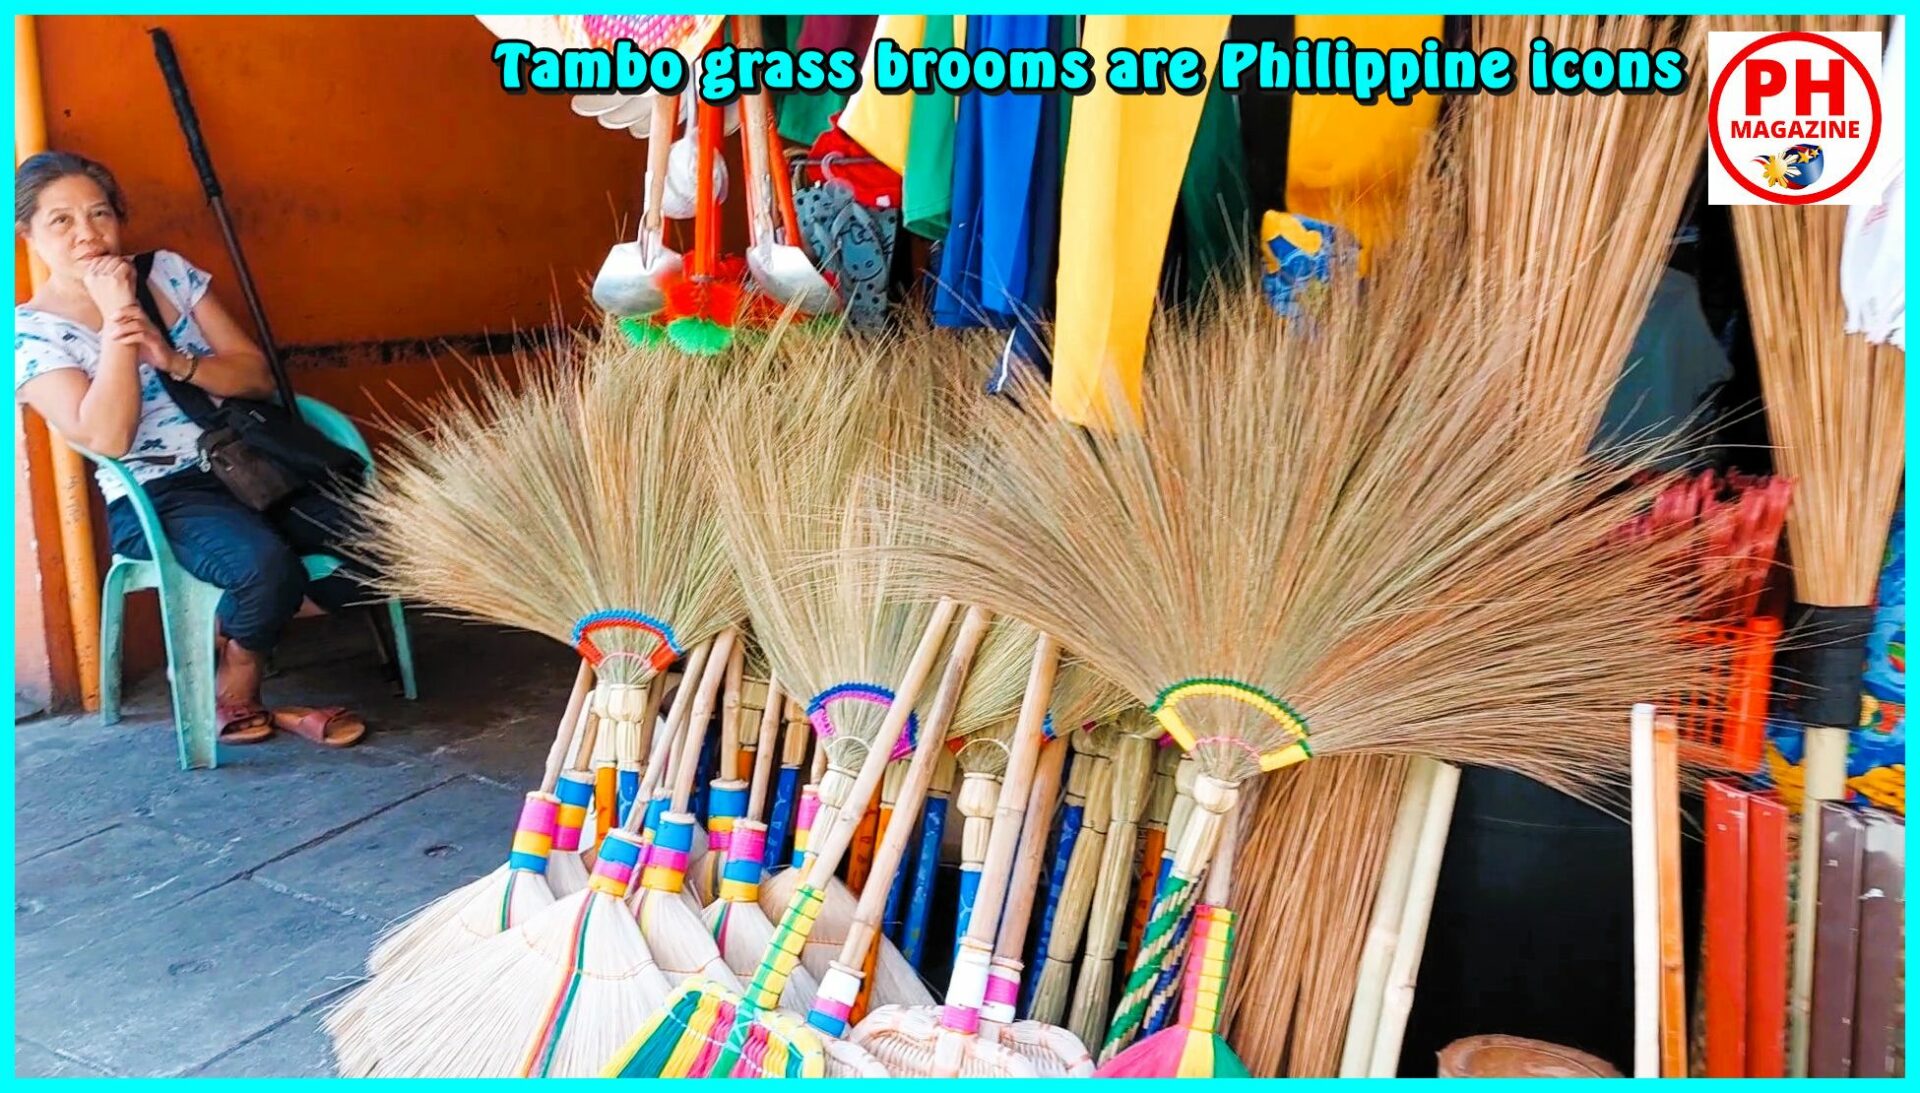 SIGHTS OF NEGROS - PHOTO OF THE DAY - Tambo grass brooms are Philippine icons